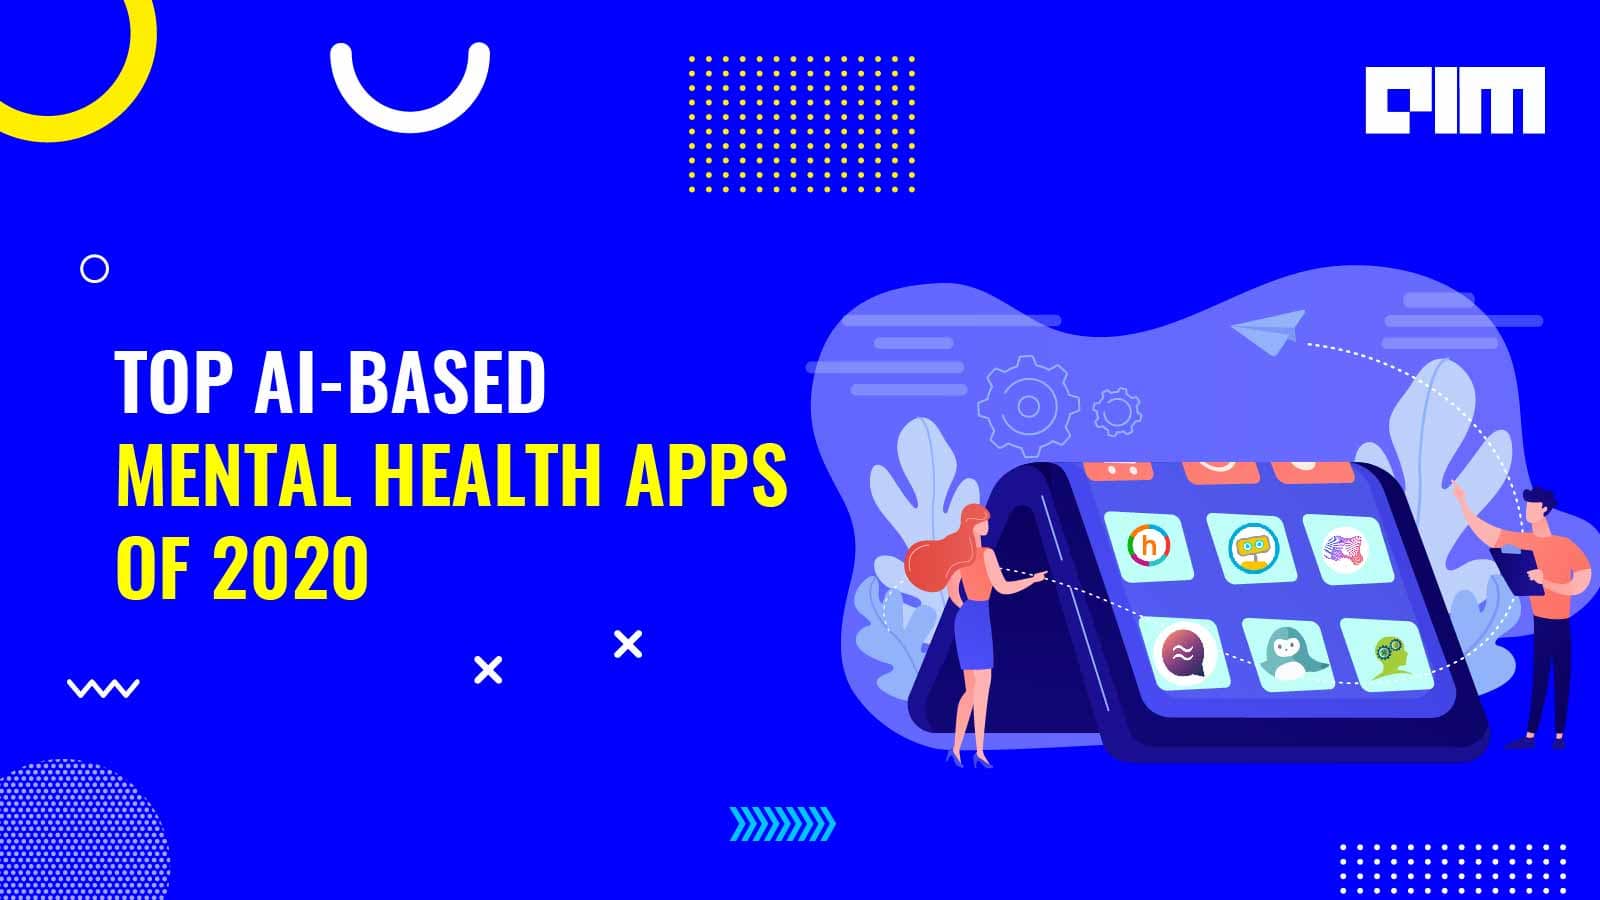 Can an AI bot improve people's health and wellbeing?